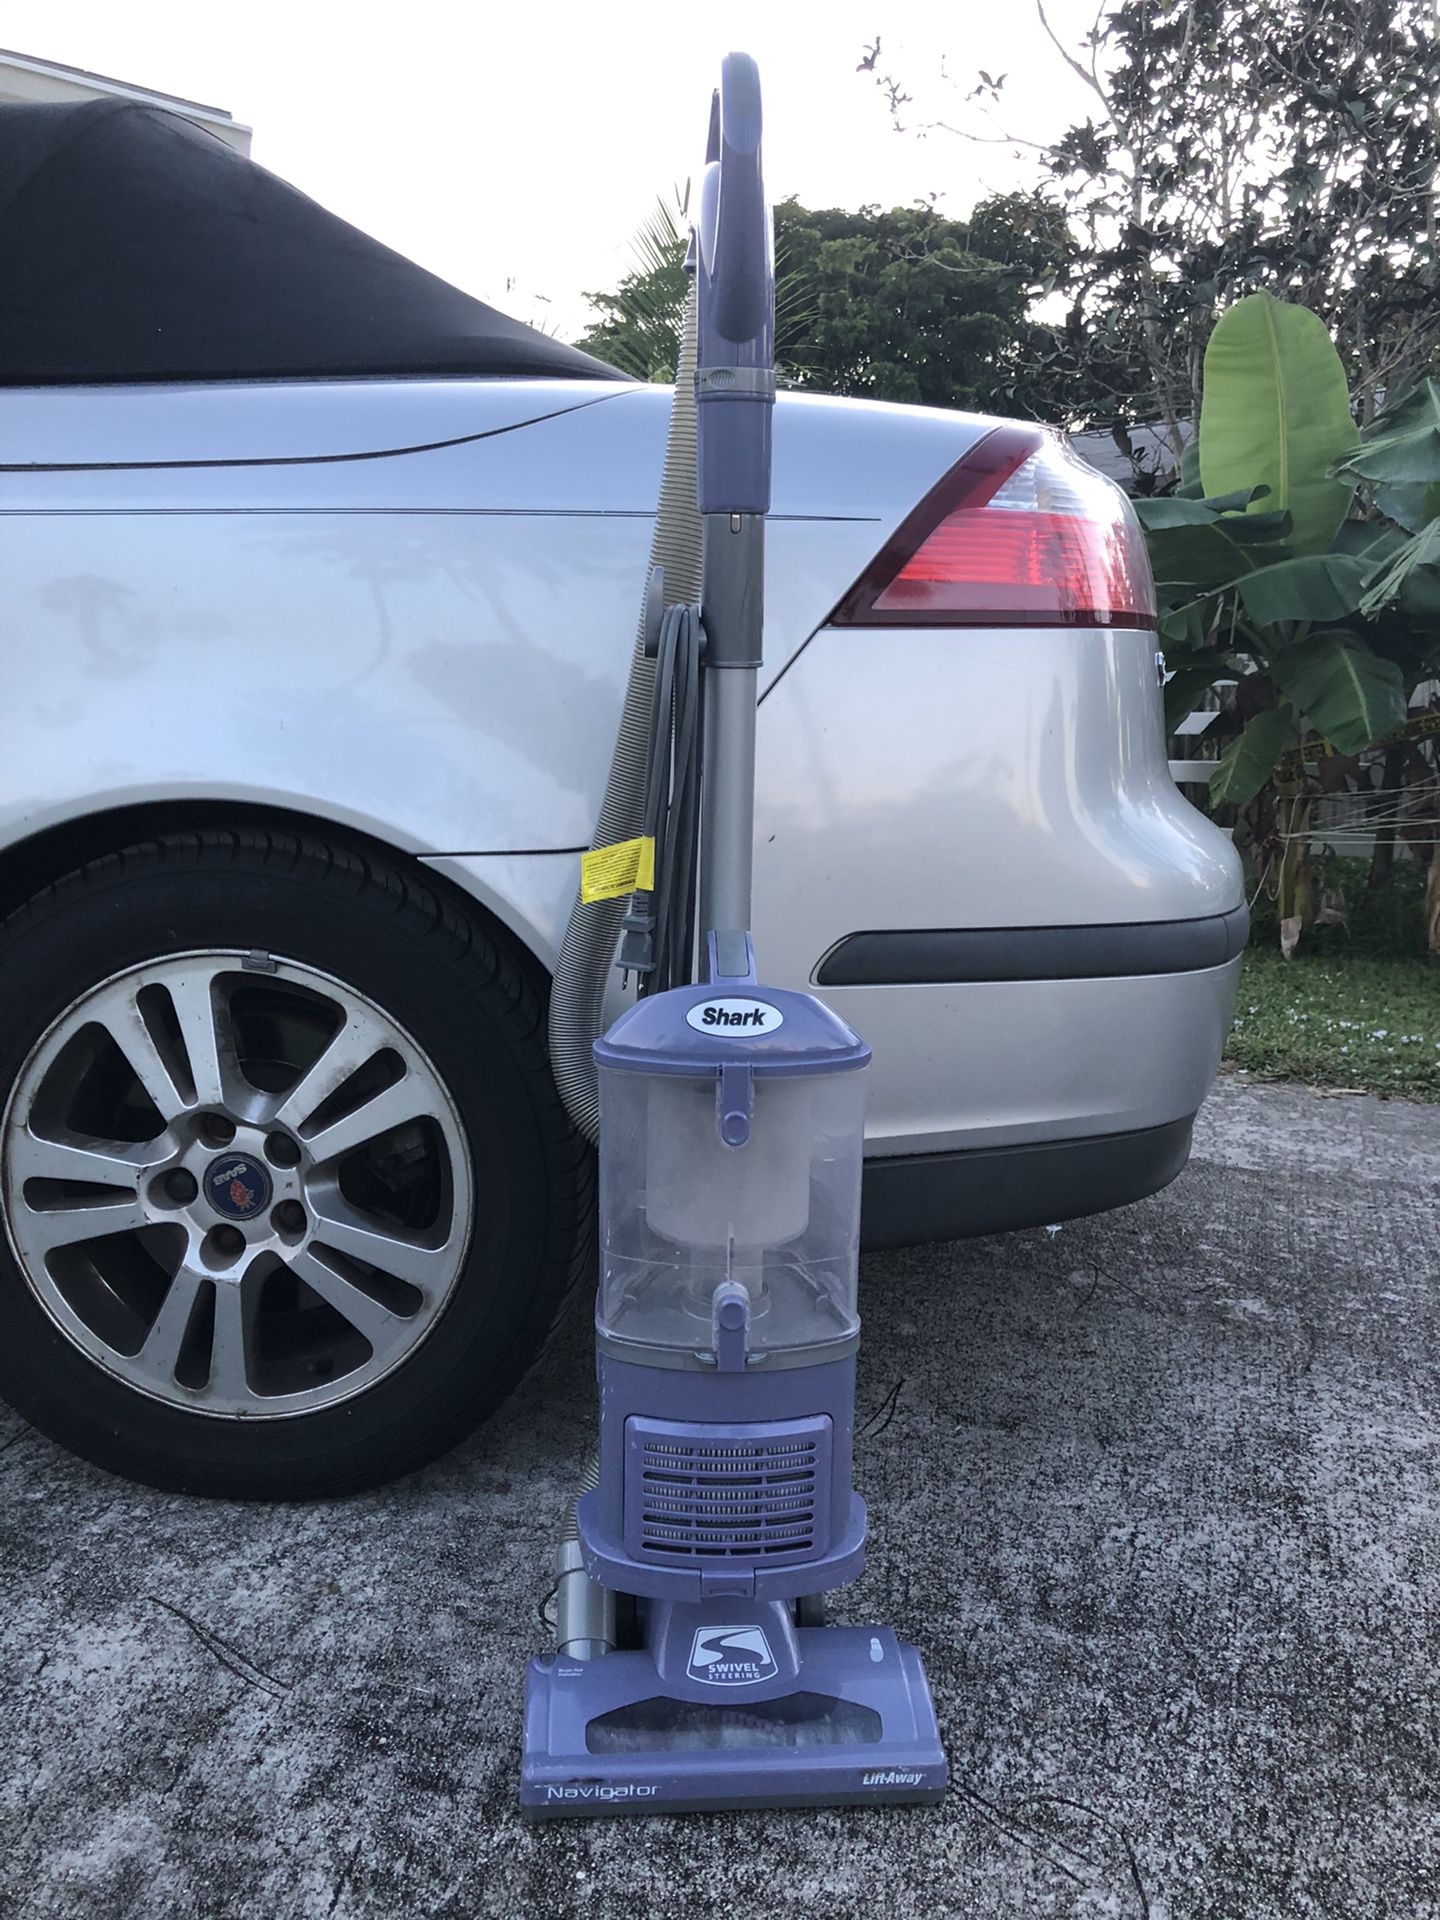 Shark Navigator Upright Vacuum for Carpet and Hard Floor with Lift-A way Handheld HEPA Filter, and Anti-Allergy Seal (NV352), Lavender